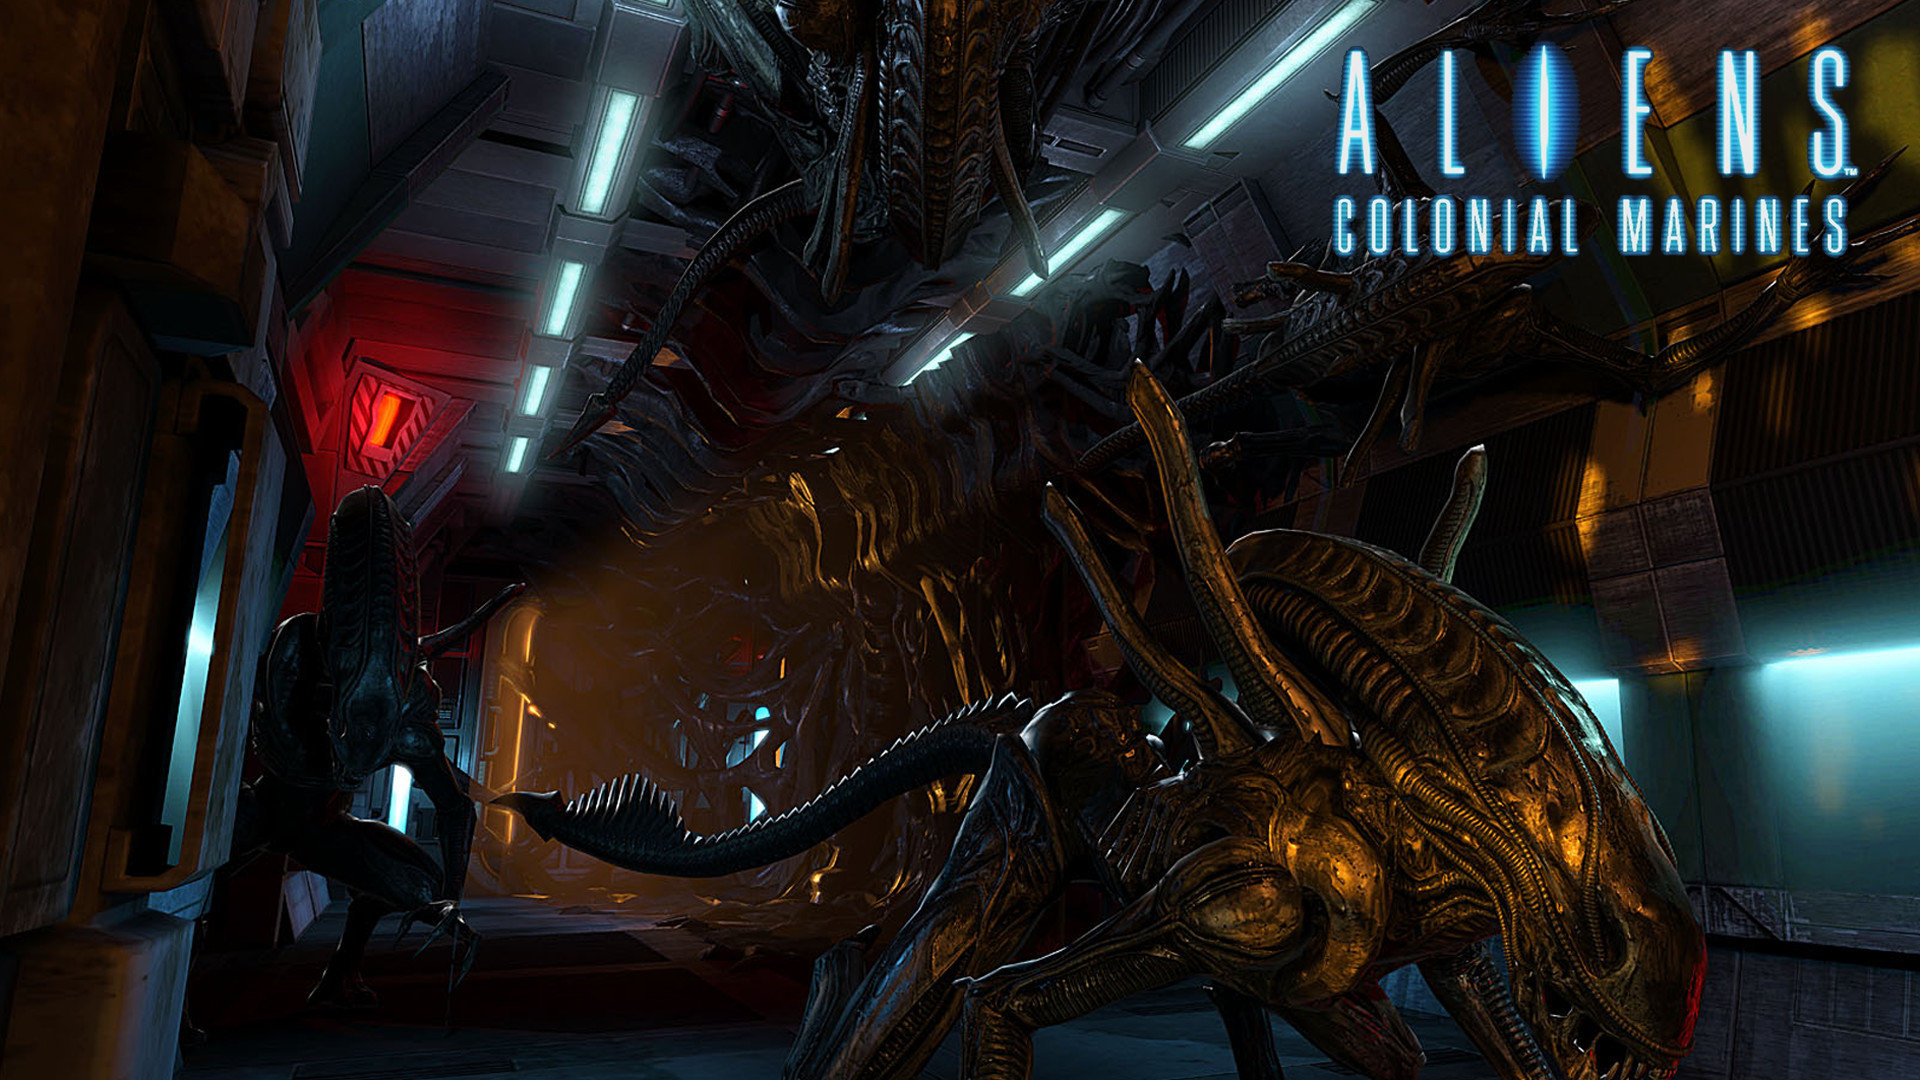 Awesome Aliens: Colonial Marines free wallpaper ID:276120 for hd 1920x1080 PC